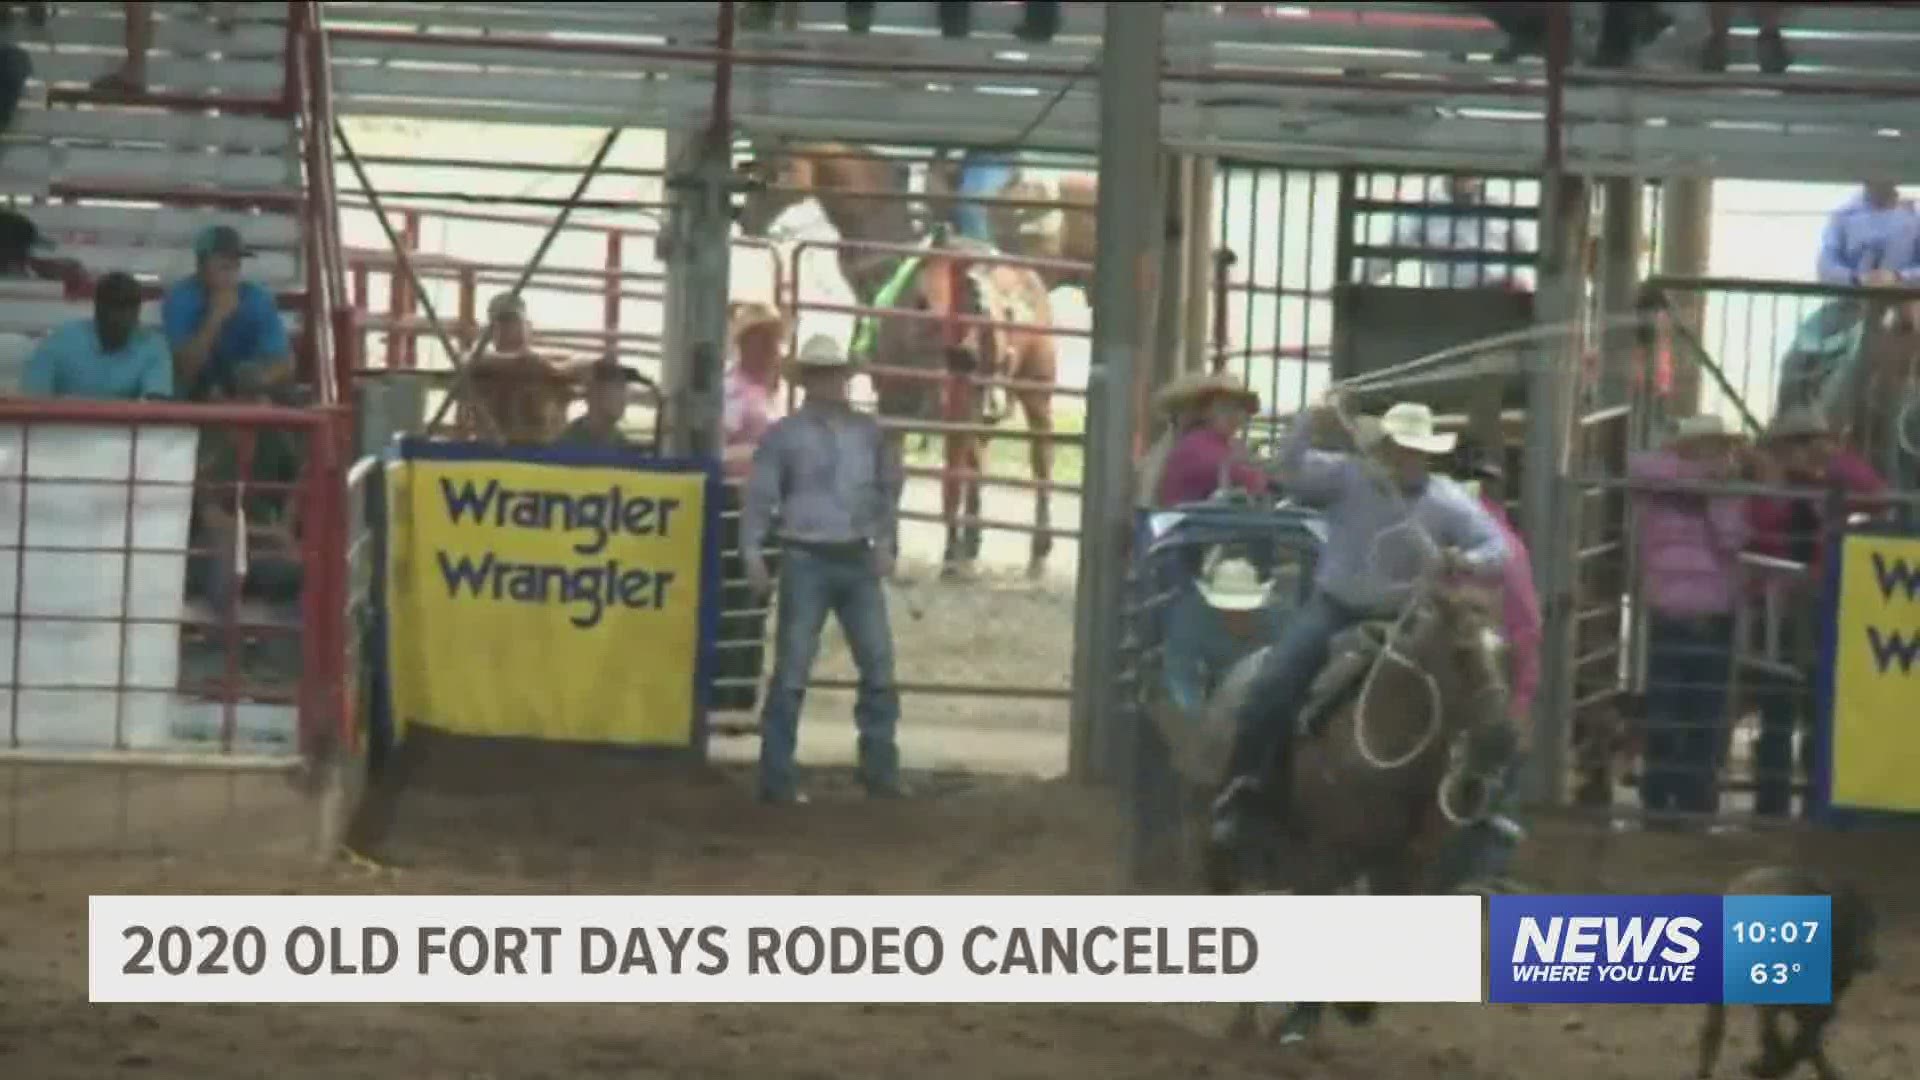 2020 Old Fort Days Rodeo canceled due to COVID-19 pandemic